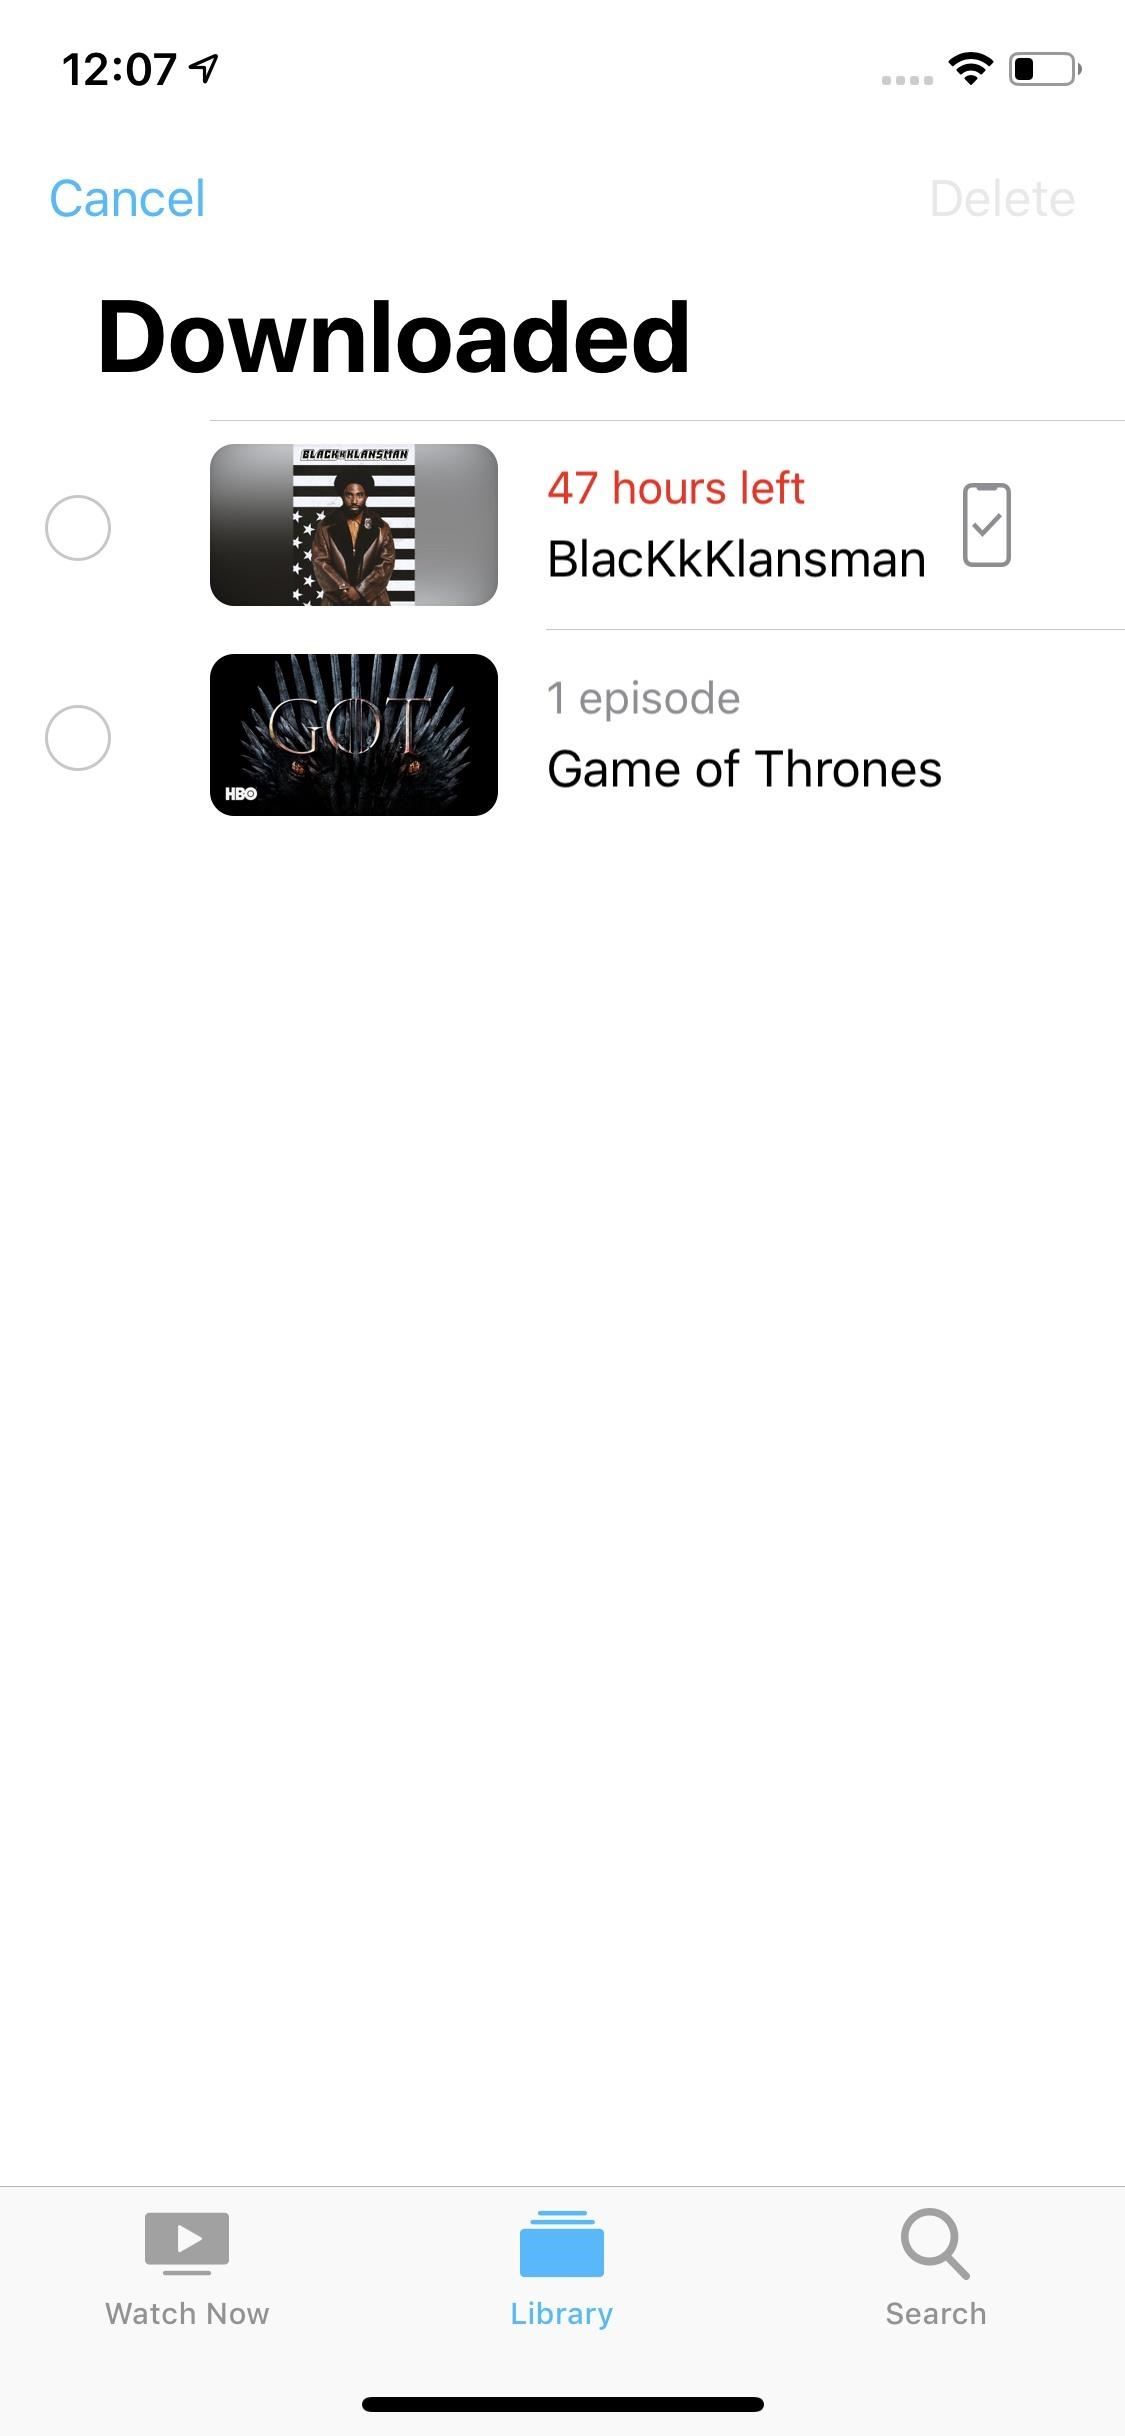 How to Watch HBO Offline on Your iPhone for 'Game of Thrones' Anytime